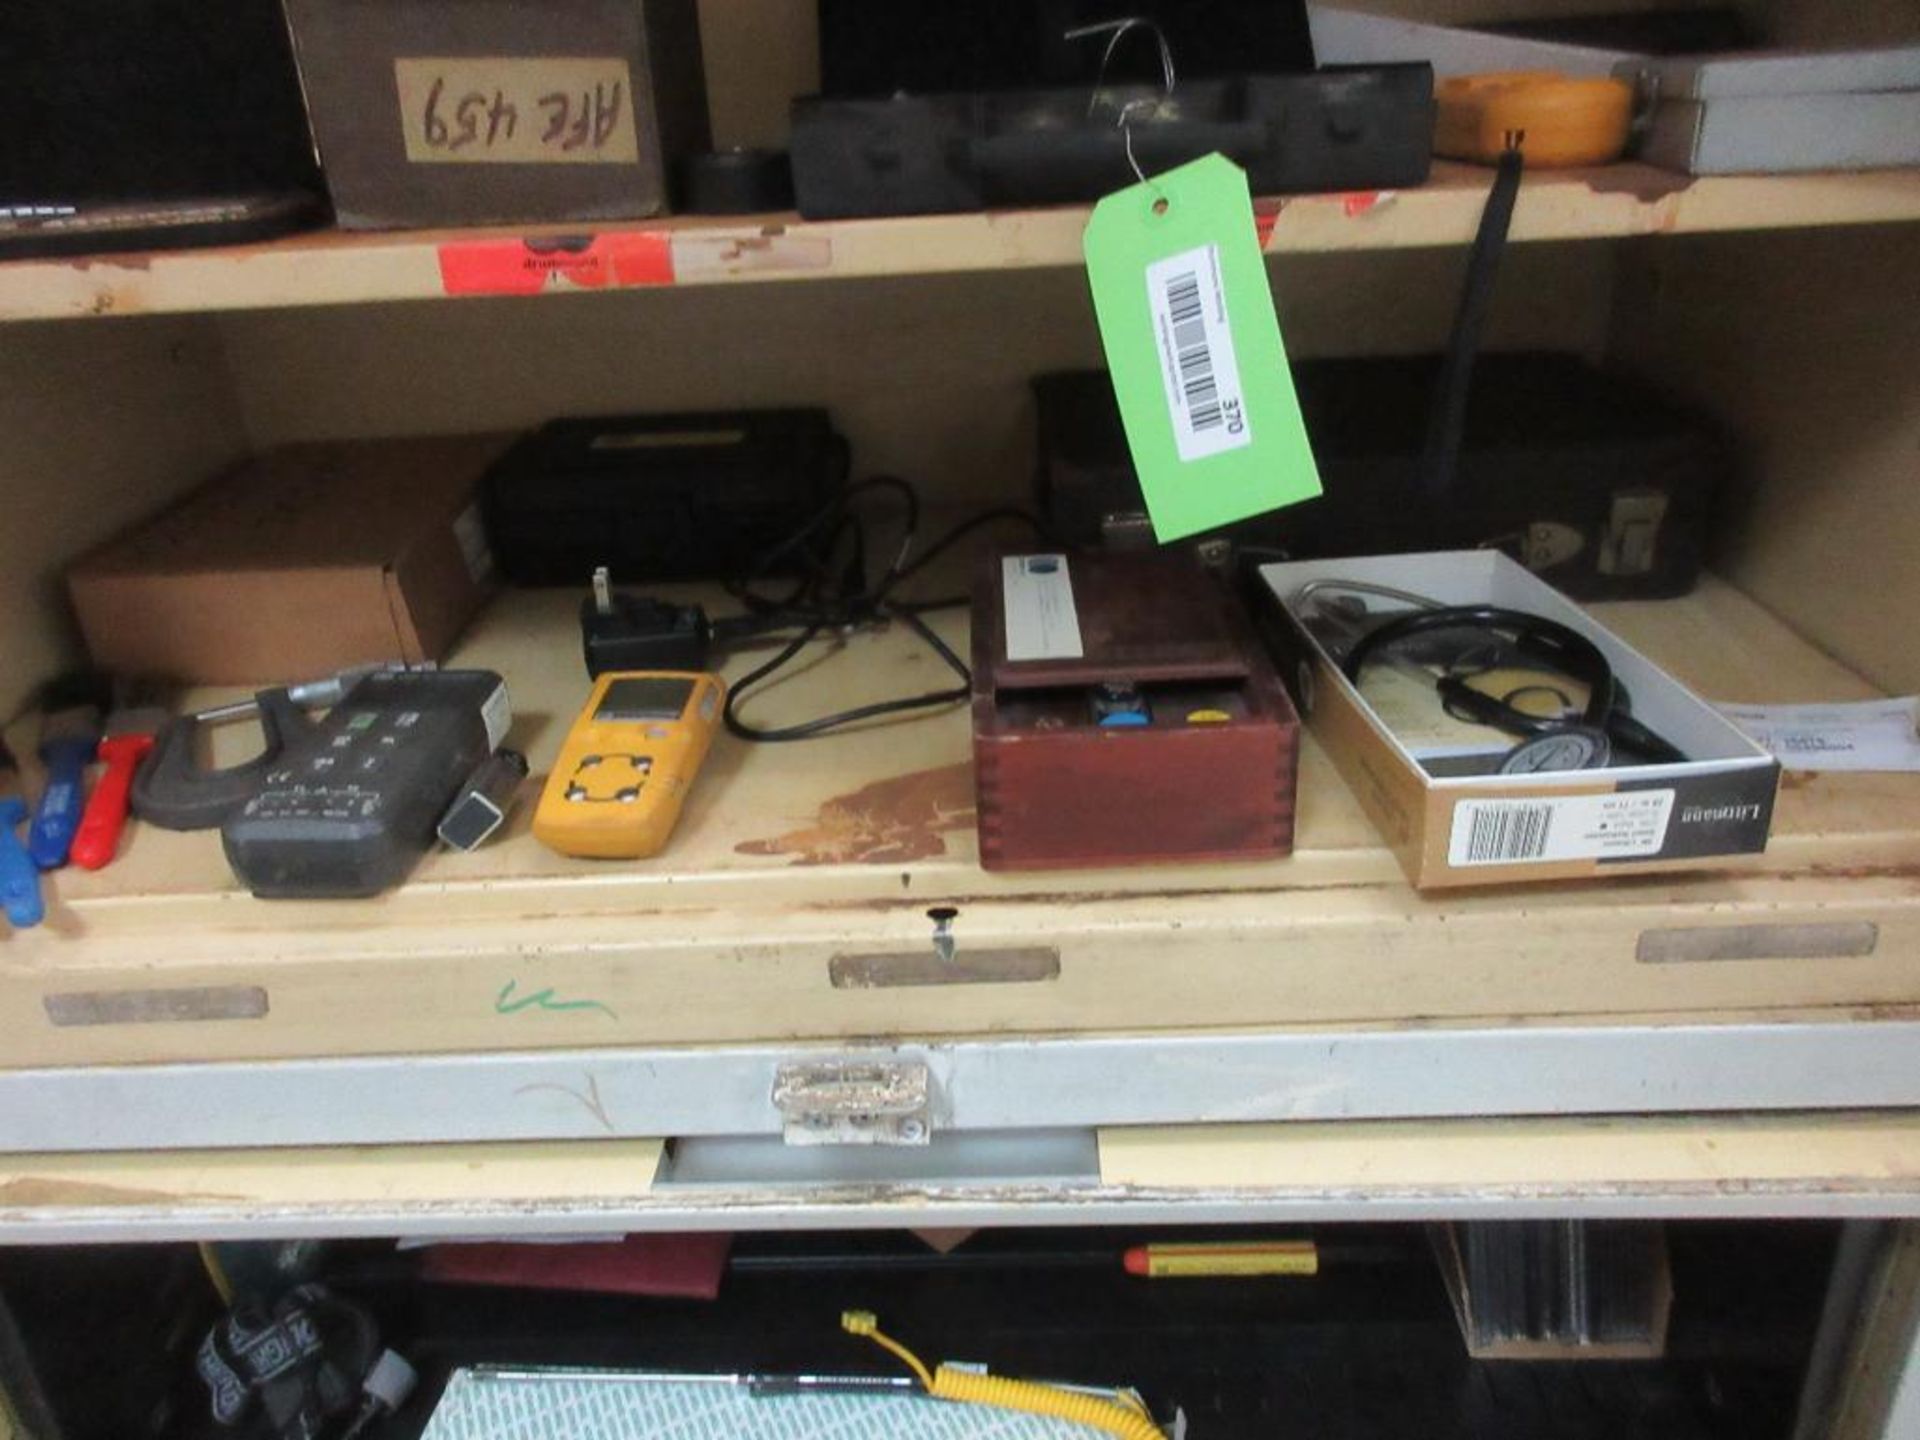 CONTENTS OF 3 CABINETS IN WORK AREA, TEST AND MEASUREMENT EQUIPMENT, METERS, TOOLS, ETC (OFFICES) - Image 13 of 18